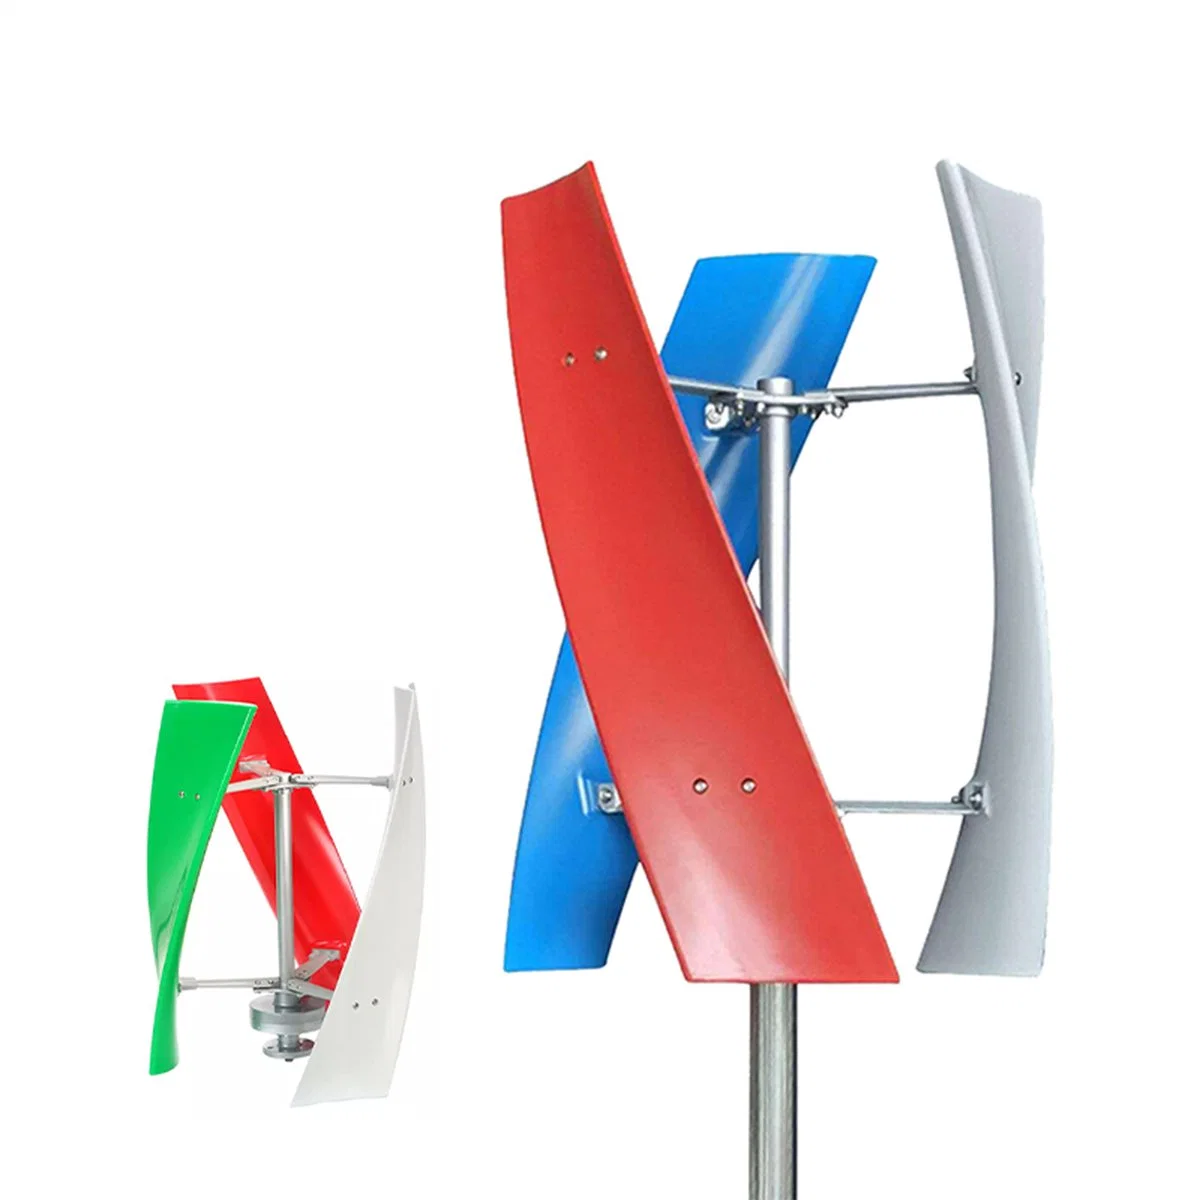 10kw Original Factory Power Supply 3 Blades Vertical Wind Turbine Air Electric 10000W Wind Generator for Home Wind Power